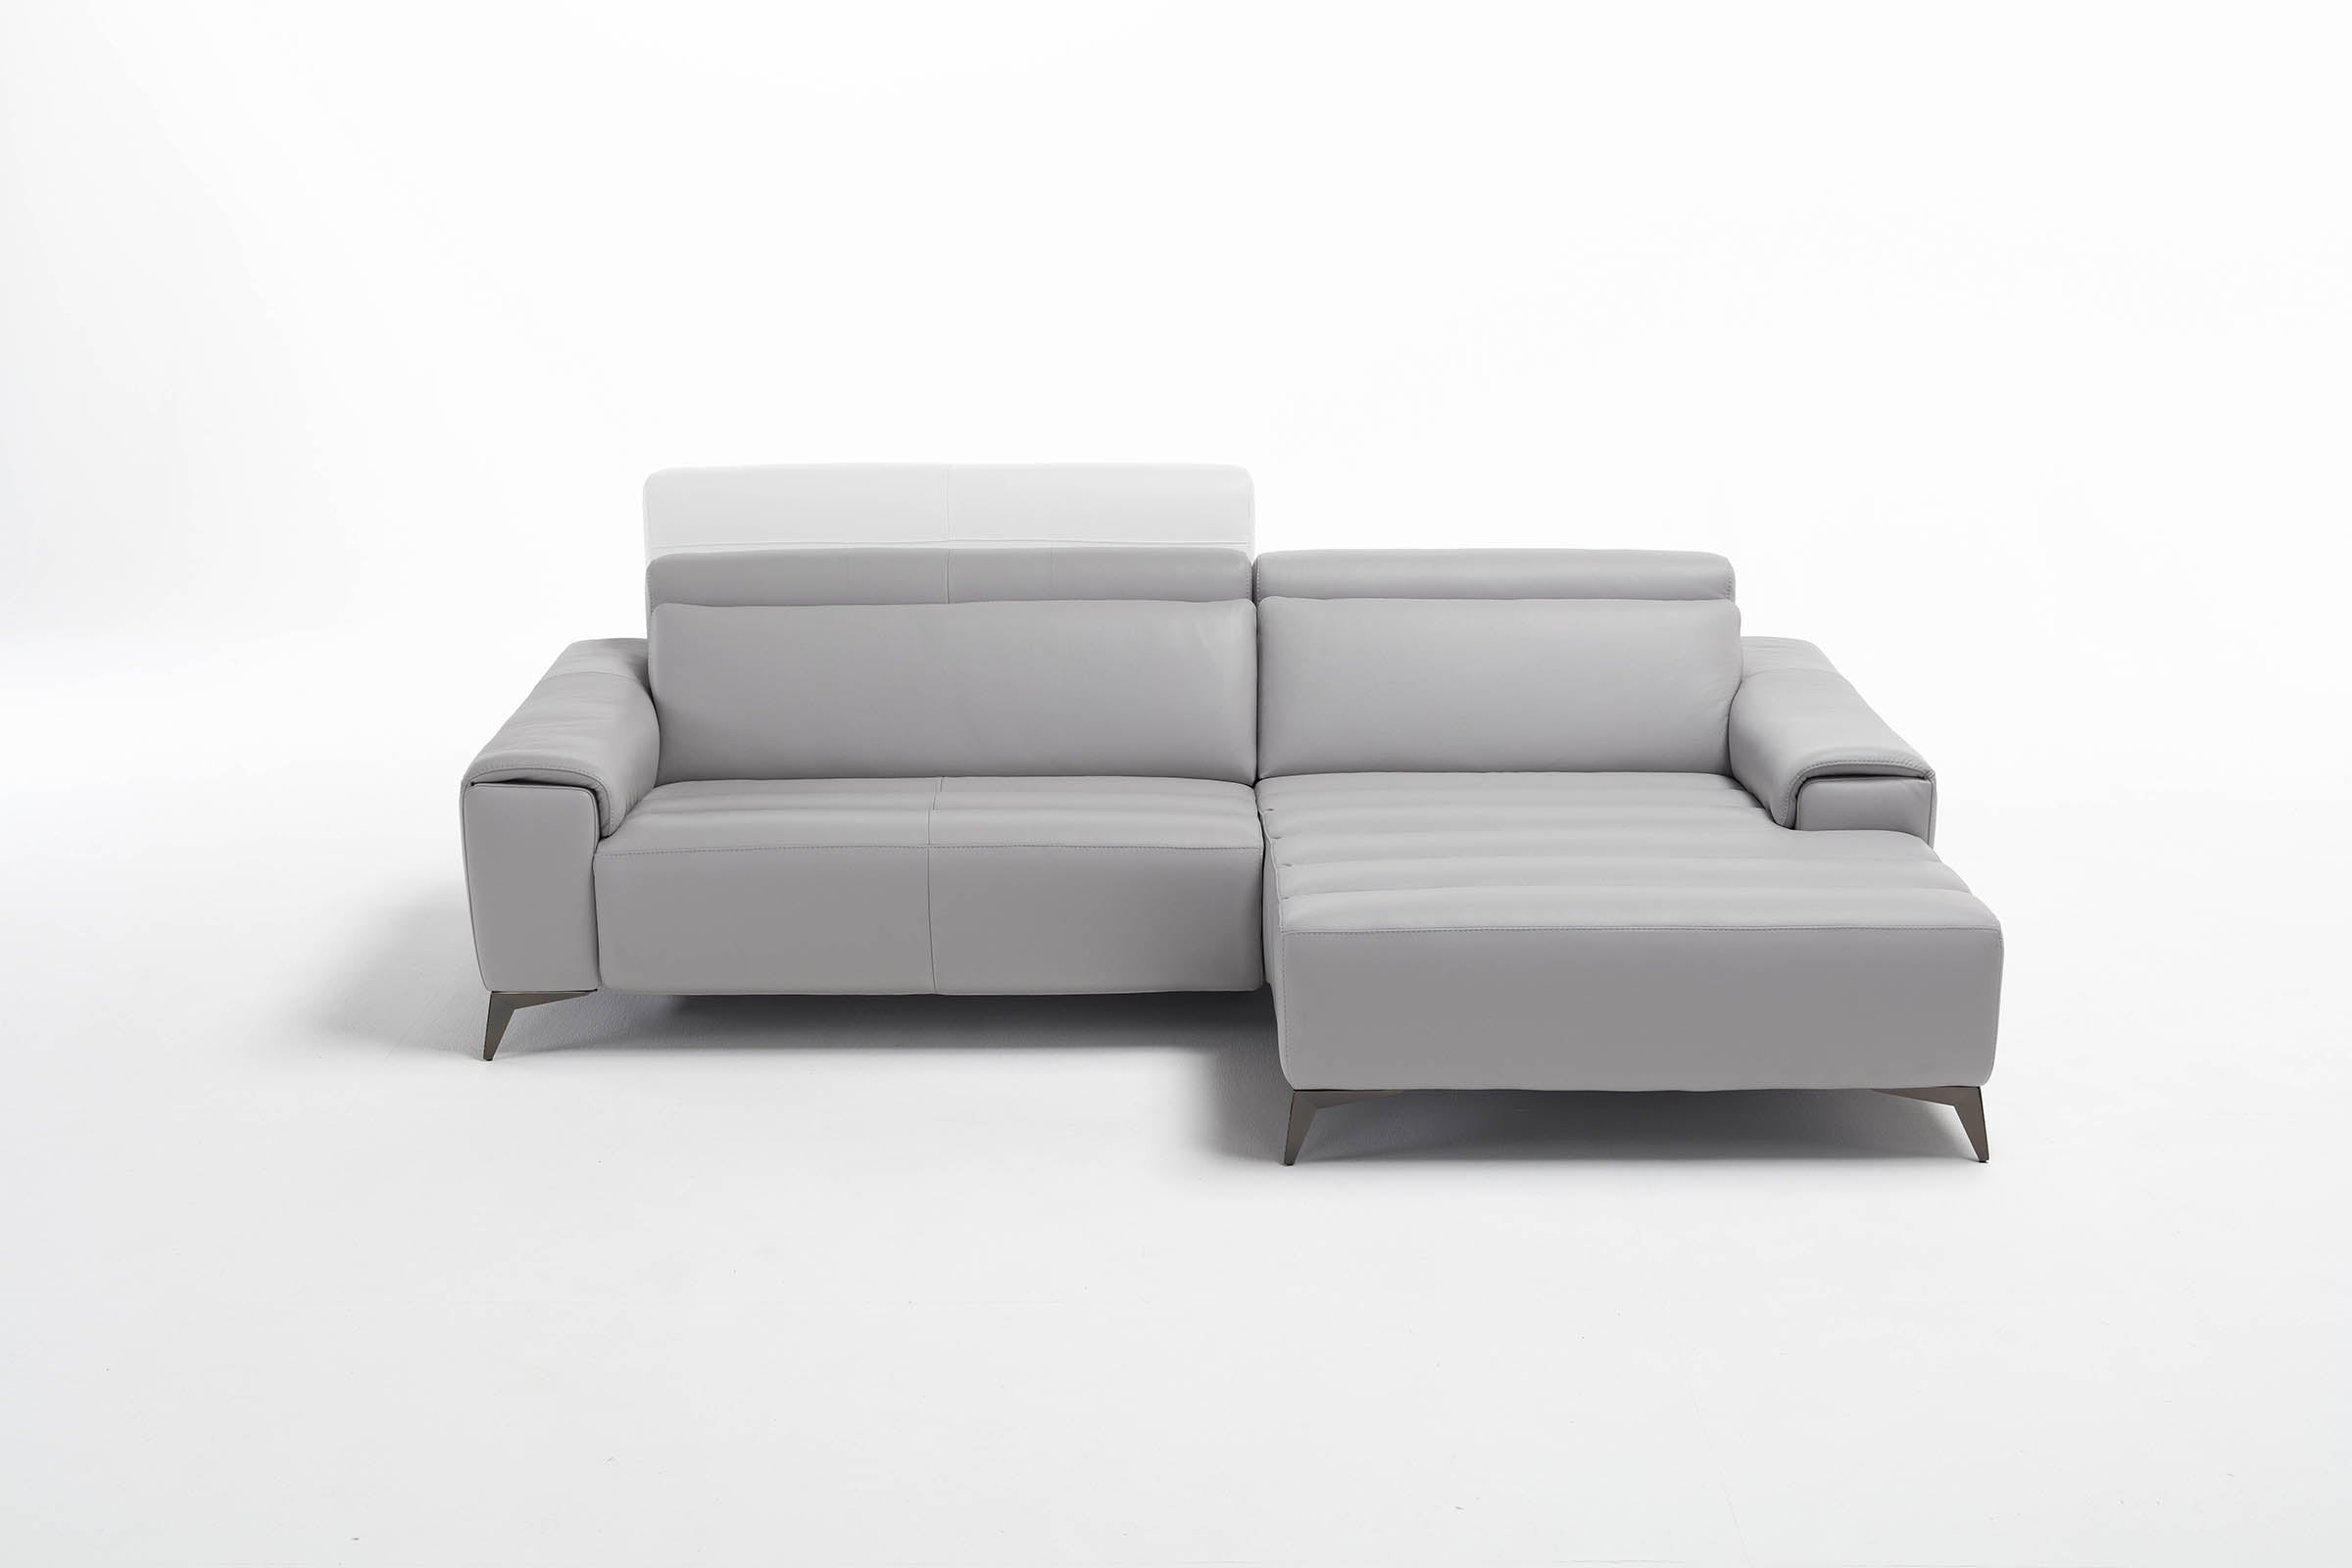 Suzette small sofa with chaise